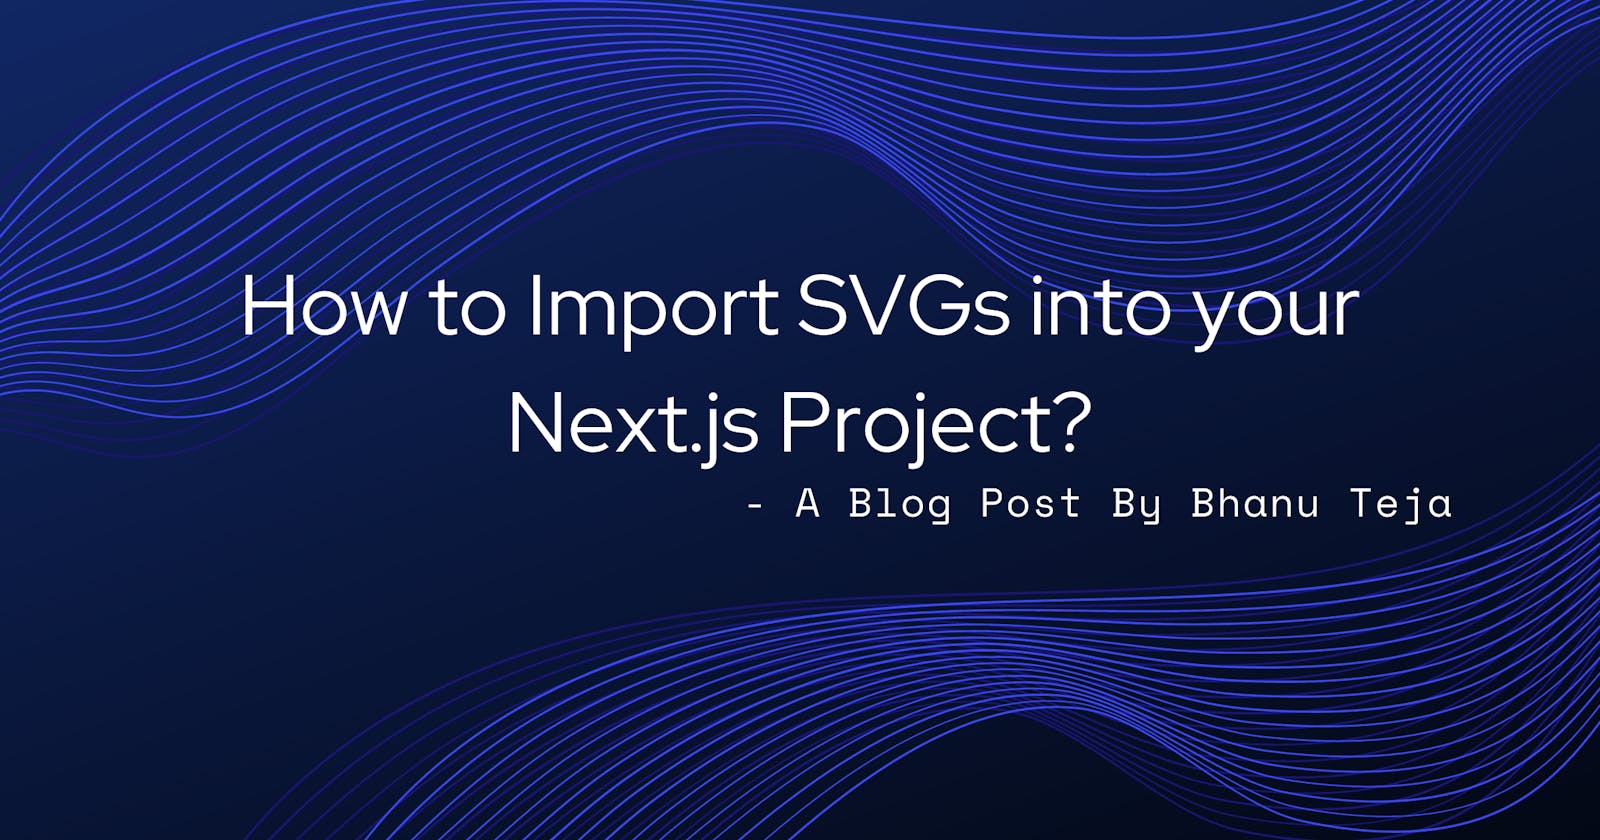 How to Import SVGs into your Next.js Project?